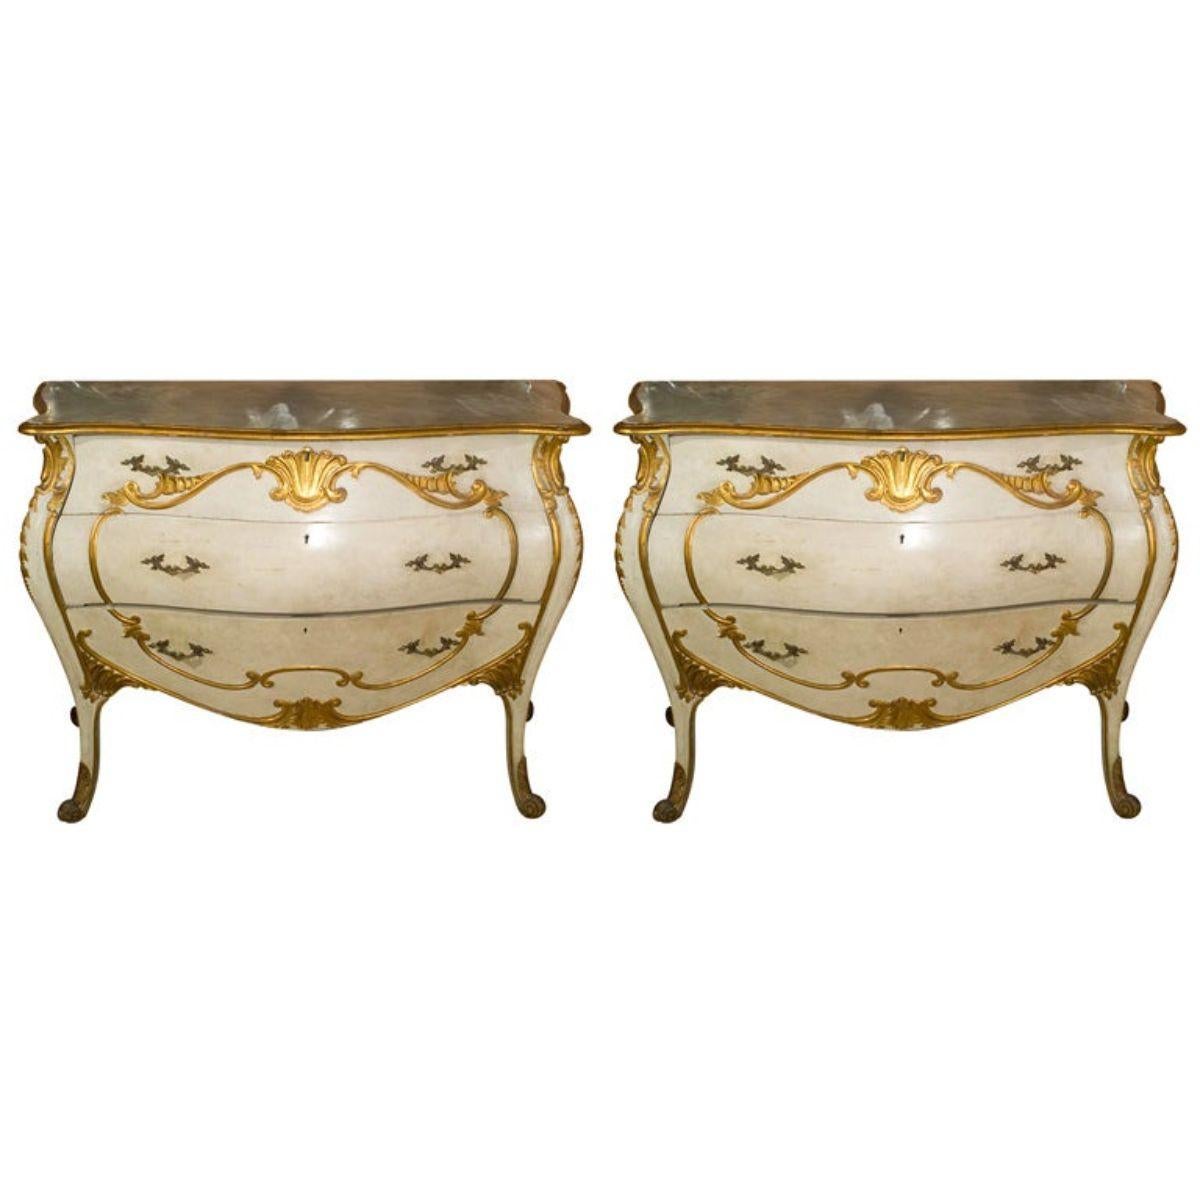 Fabulous pair of Niccolini Bombe Italian painted and gilt decorated commodes. Each done in the Louis XV style, wonderful bombe design, 24-karat gilt decorated. Either can be used as seen or with matching white marble tops conforming to each piece.